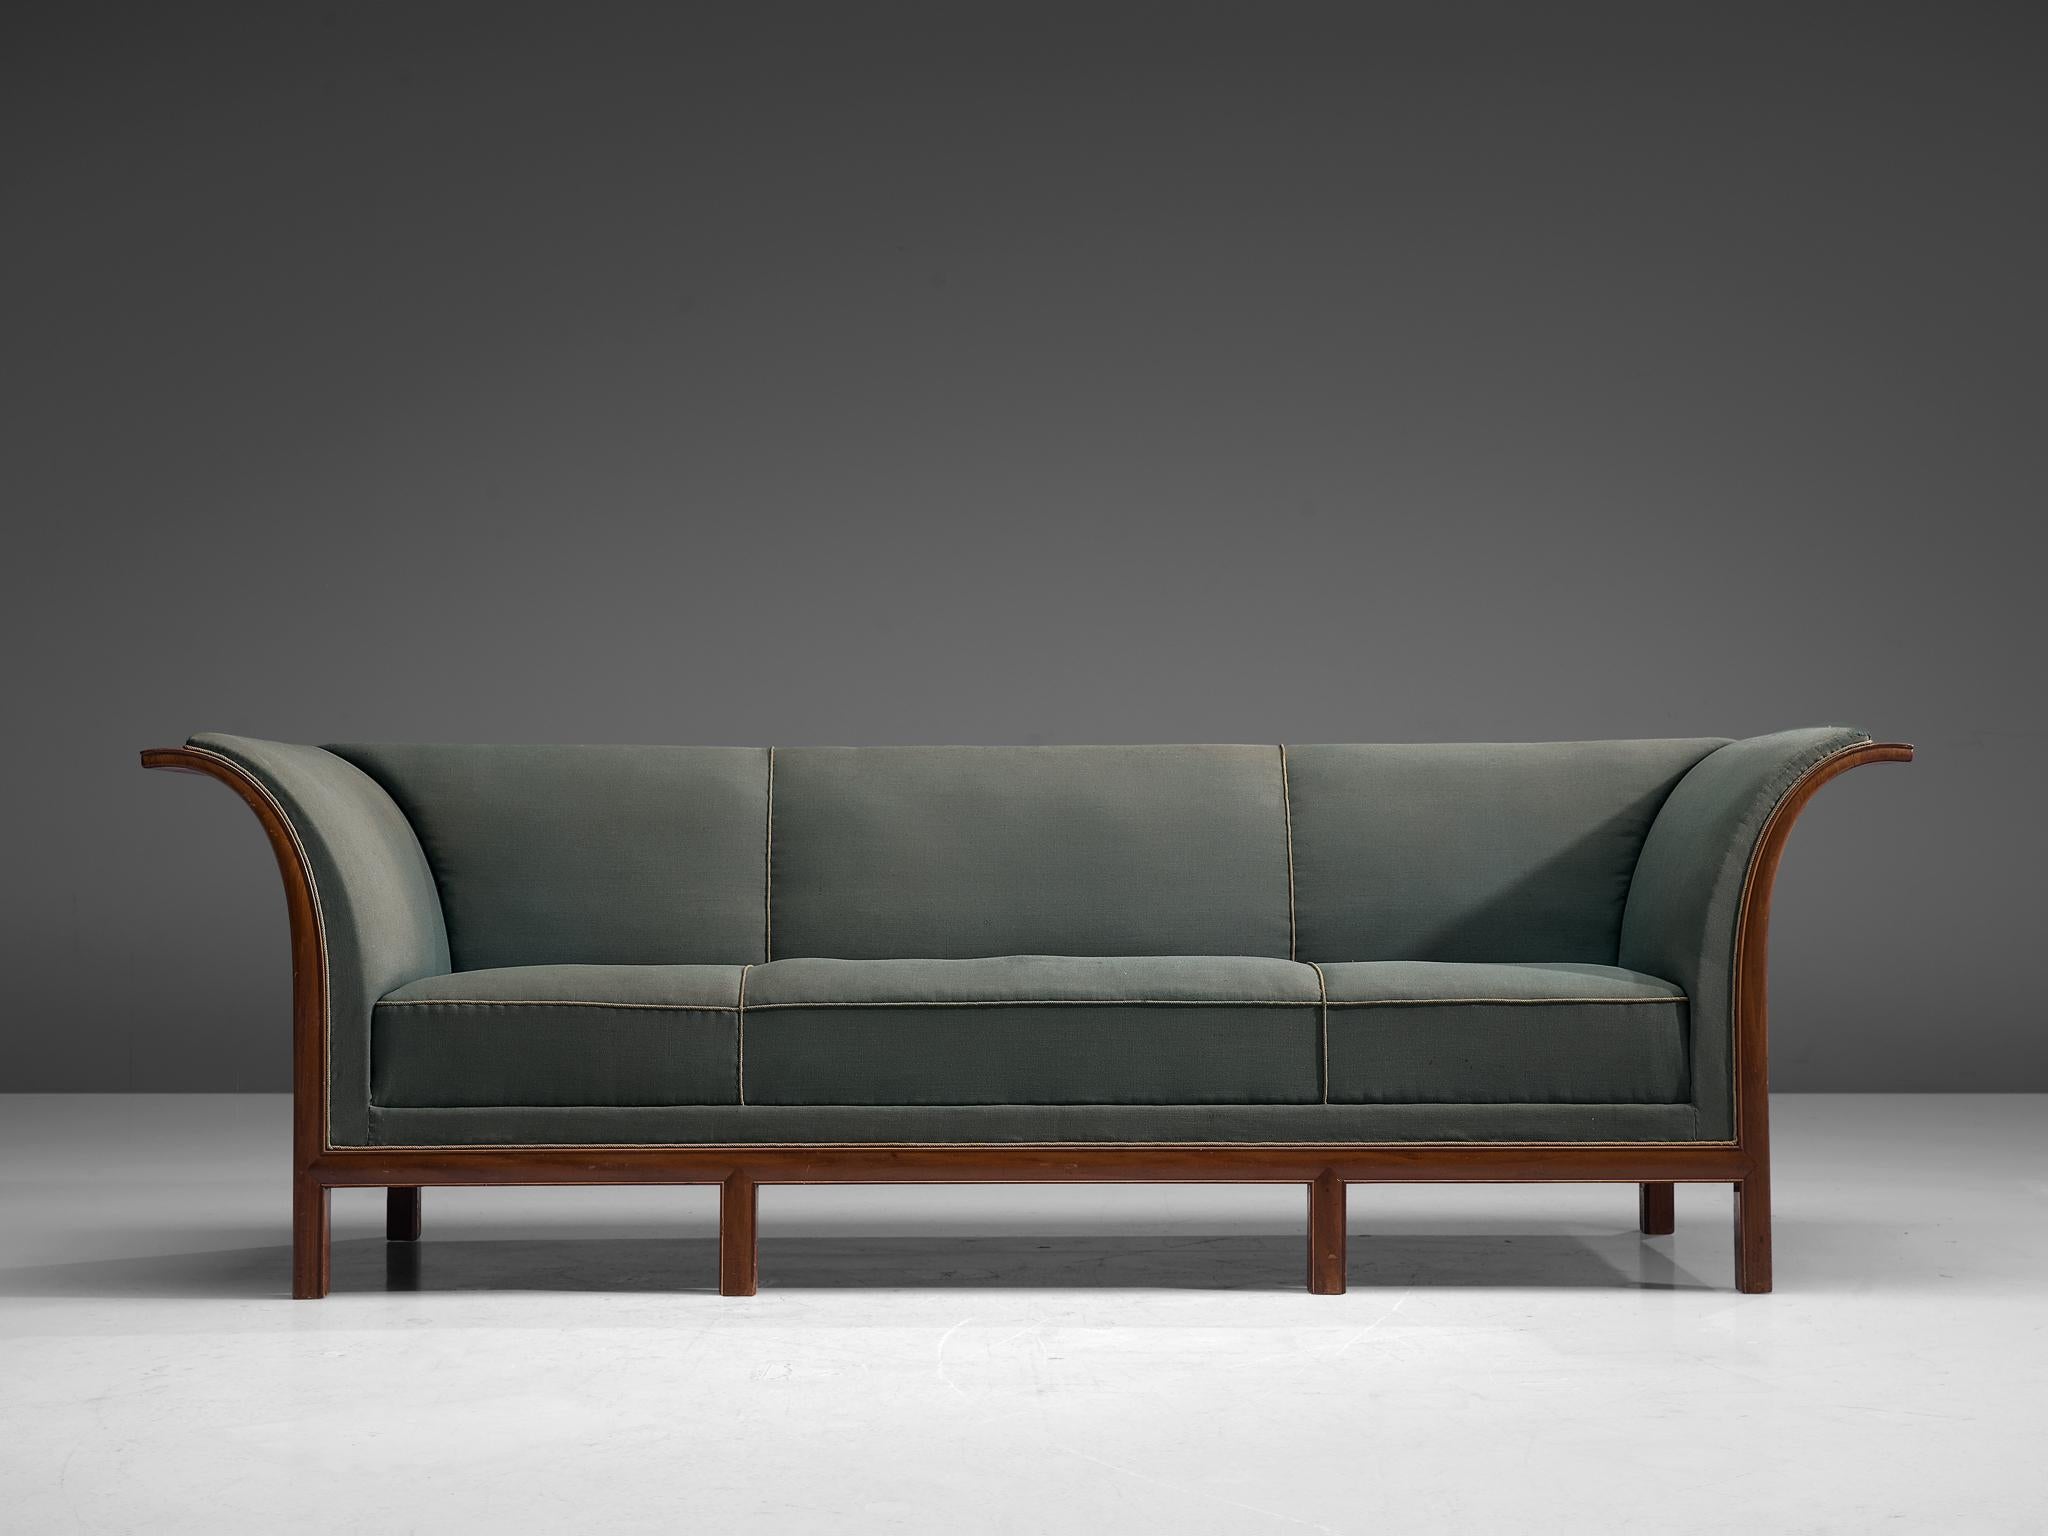 Frits Henningsen, sofa in mahogany and green fabric, Denmark, 1930s.

This classic sofa was designed and produced by master cabinet maker Frits Henningsen around the 1930s. The basic design is well balanced, showing an interesting contrast between